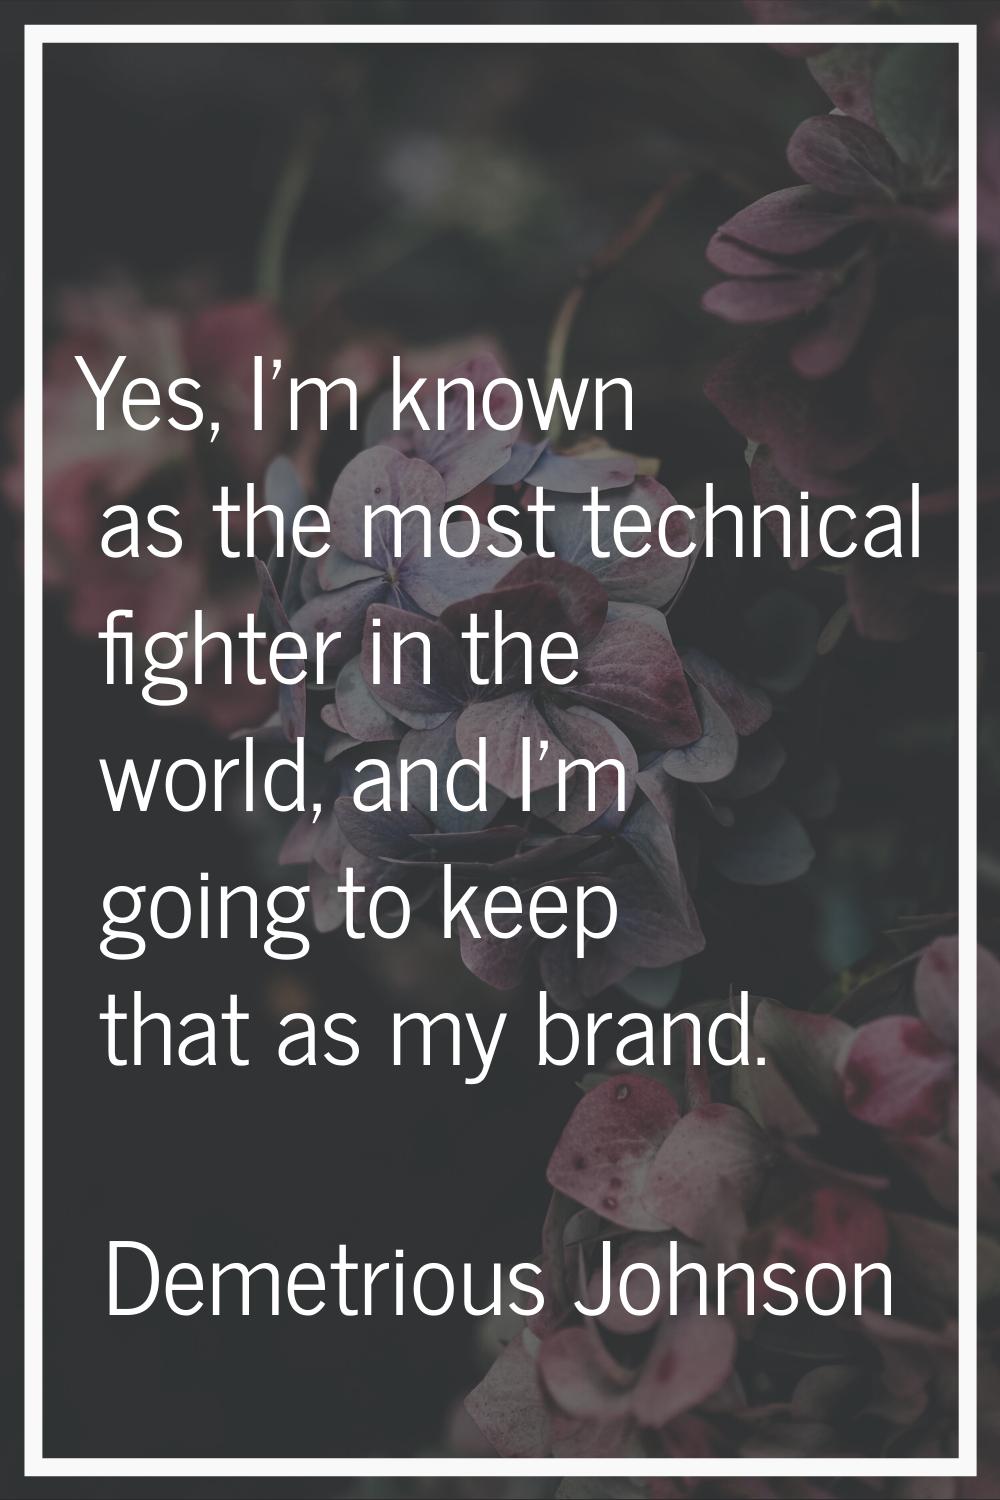 Yes, I'm known as the most technical fighter in the world, and I'm going to keep that as my brand.